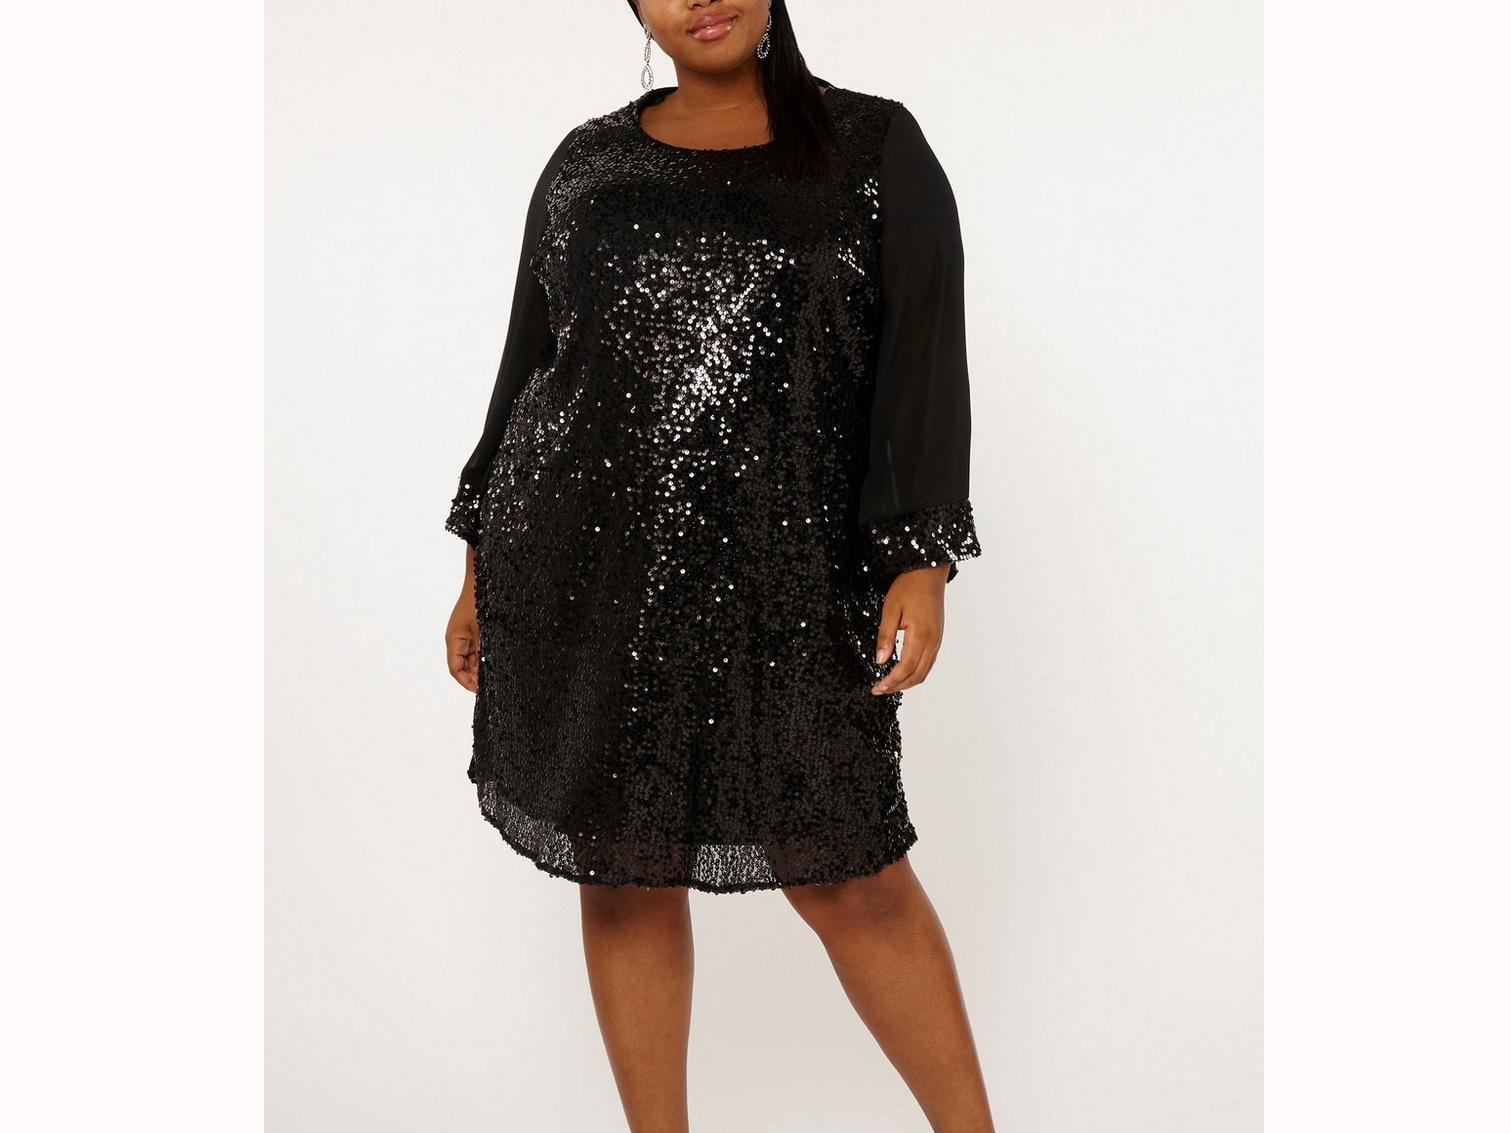 billie & blossom black sequin bodice fit and flare dress